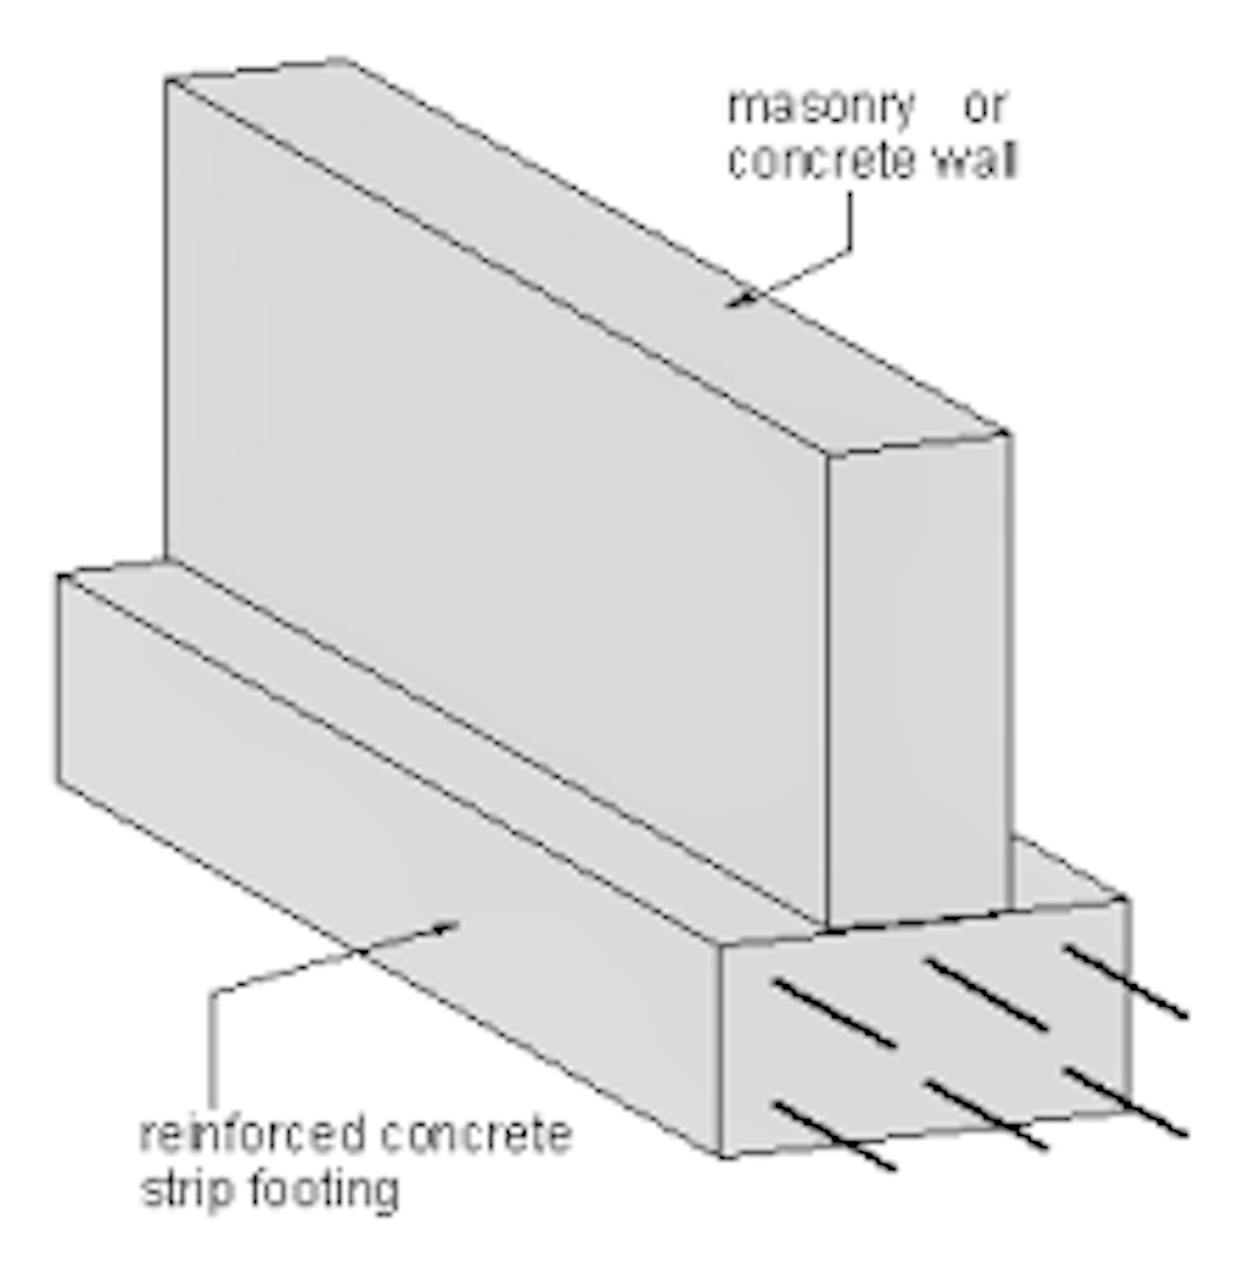 What is diffrent between strap footing and wall footing?